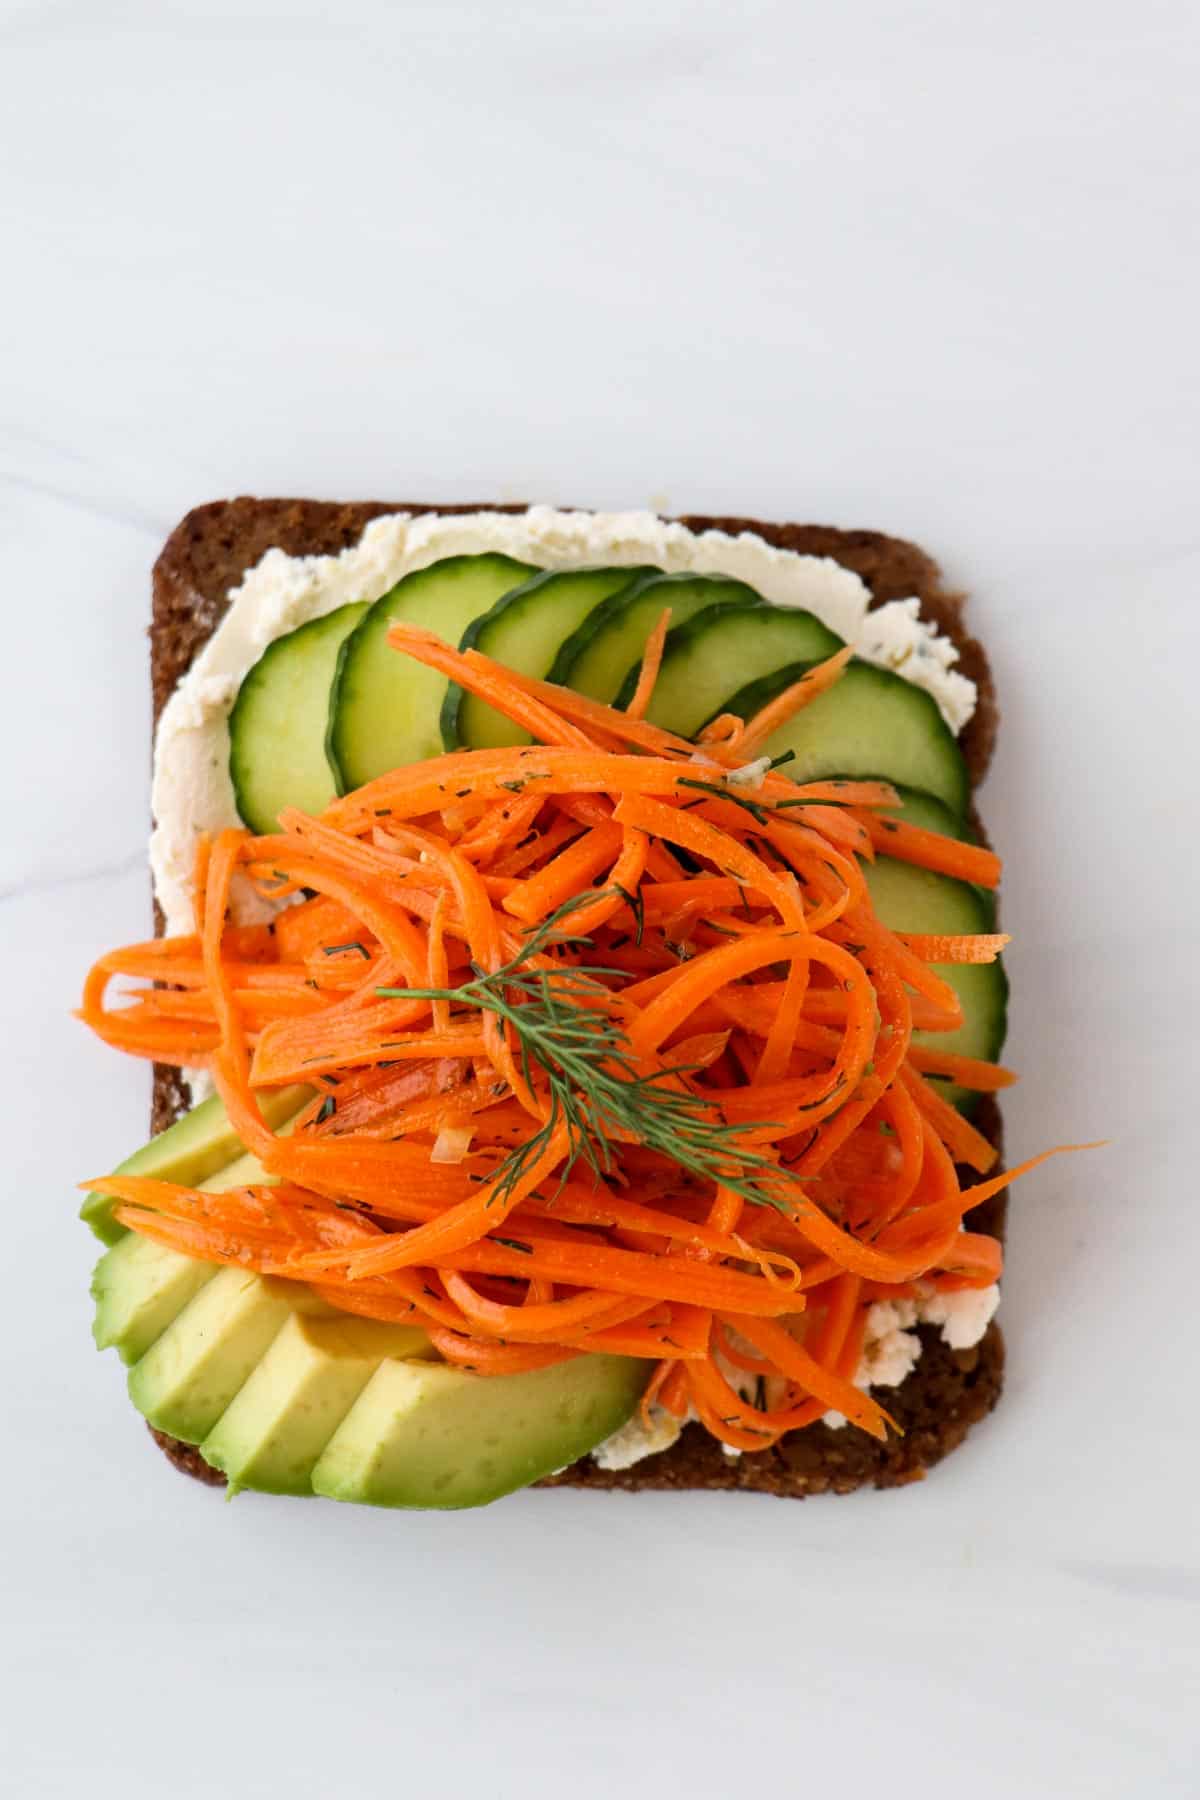 Overhead view of Carrot Salad Smørrebrød with Boursin, Cucumber and Avocado.